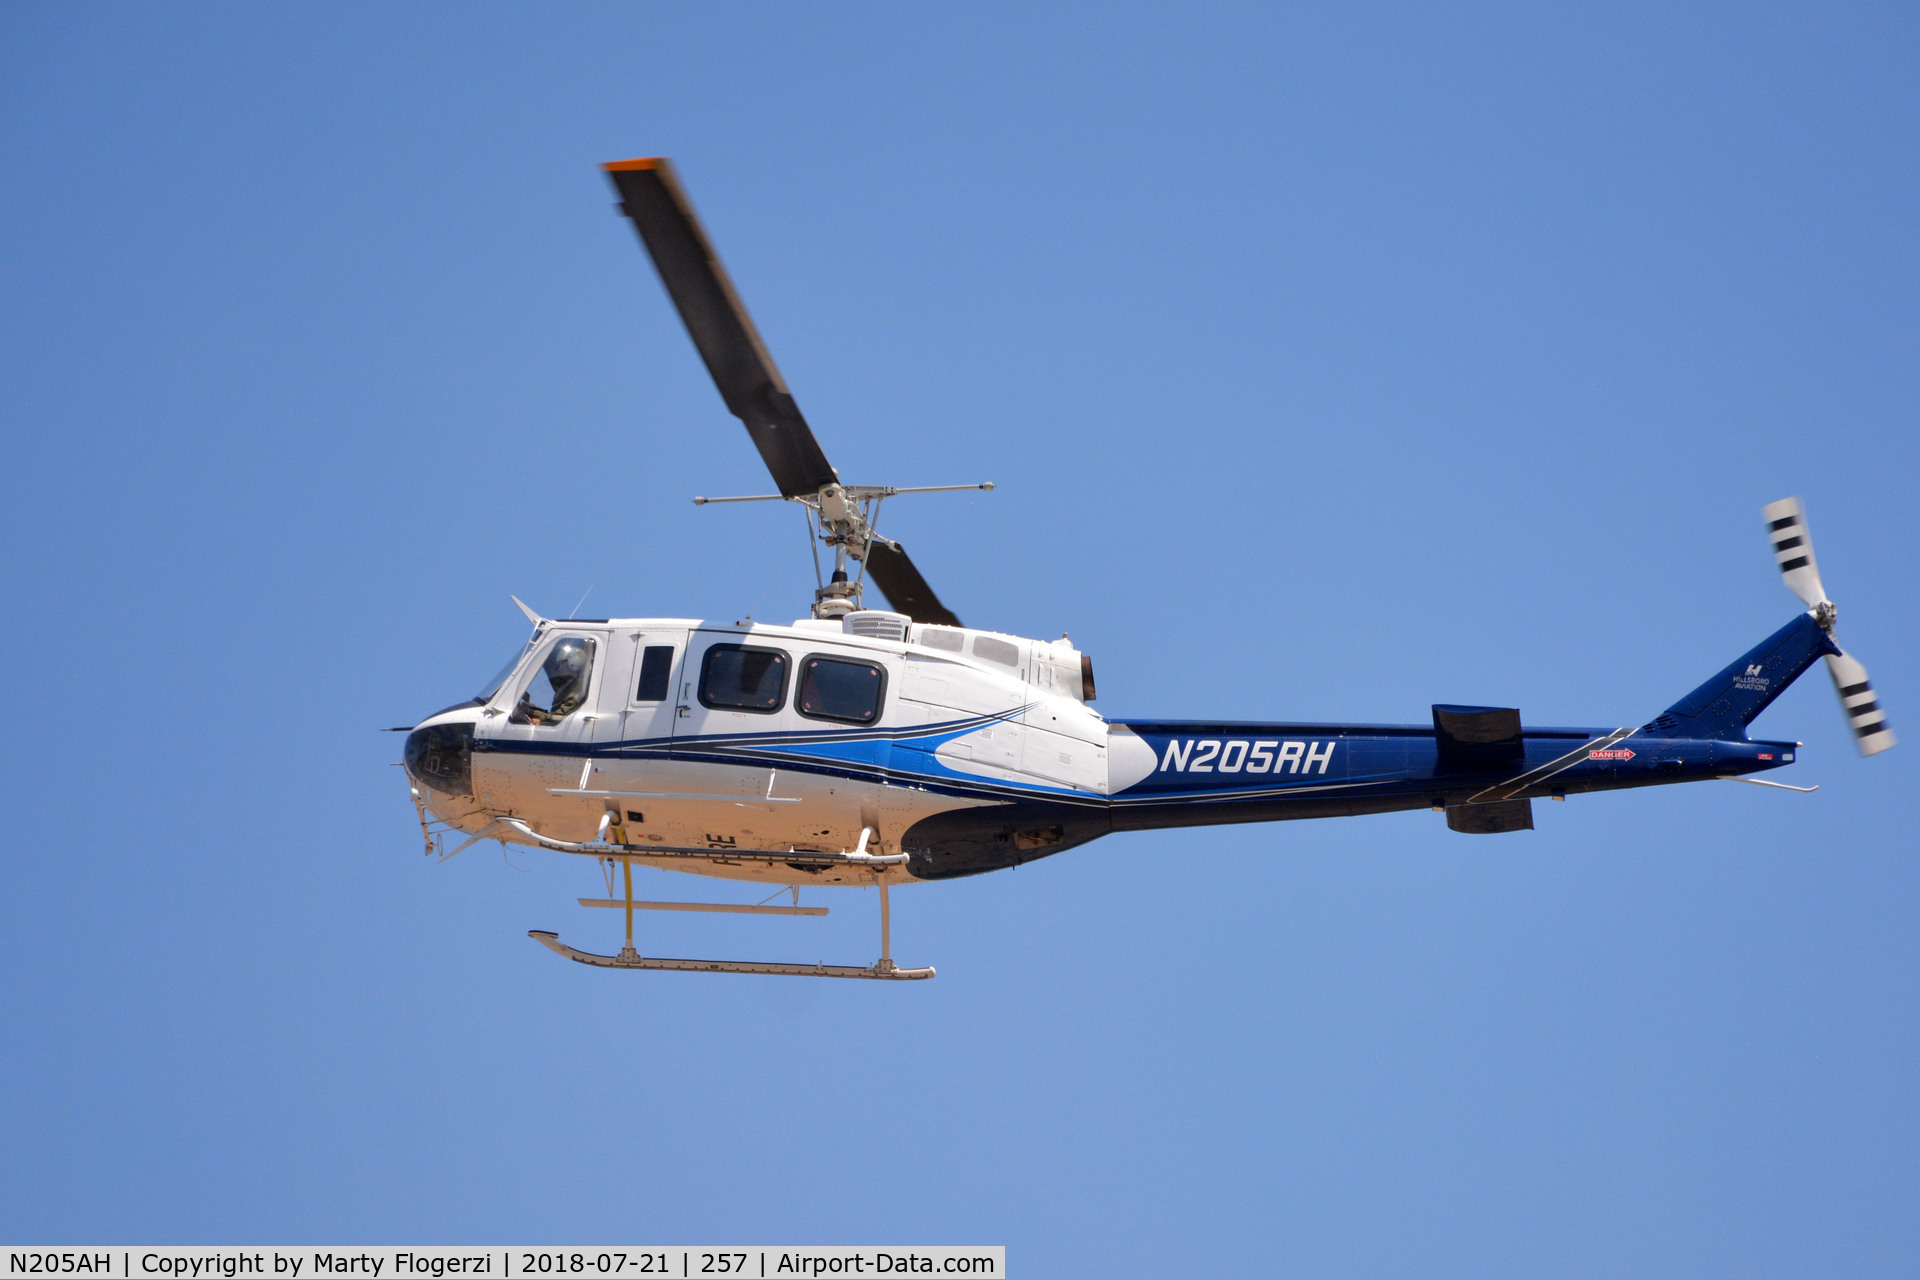 N205AH, Bell 205A-1 C/N 30206, Taken from the Crater Lake Stampede Rodeo, adjacent to the Airport in Chiloquin, Oregon, 21 July 2018.